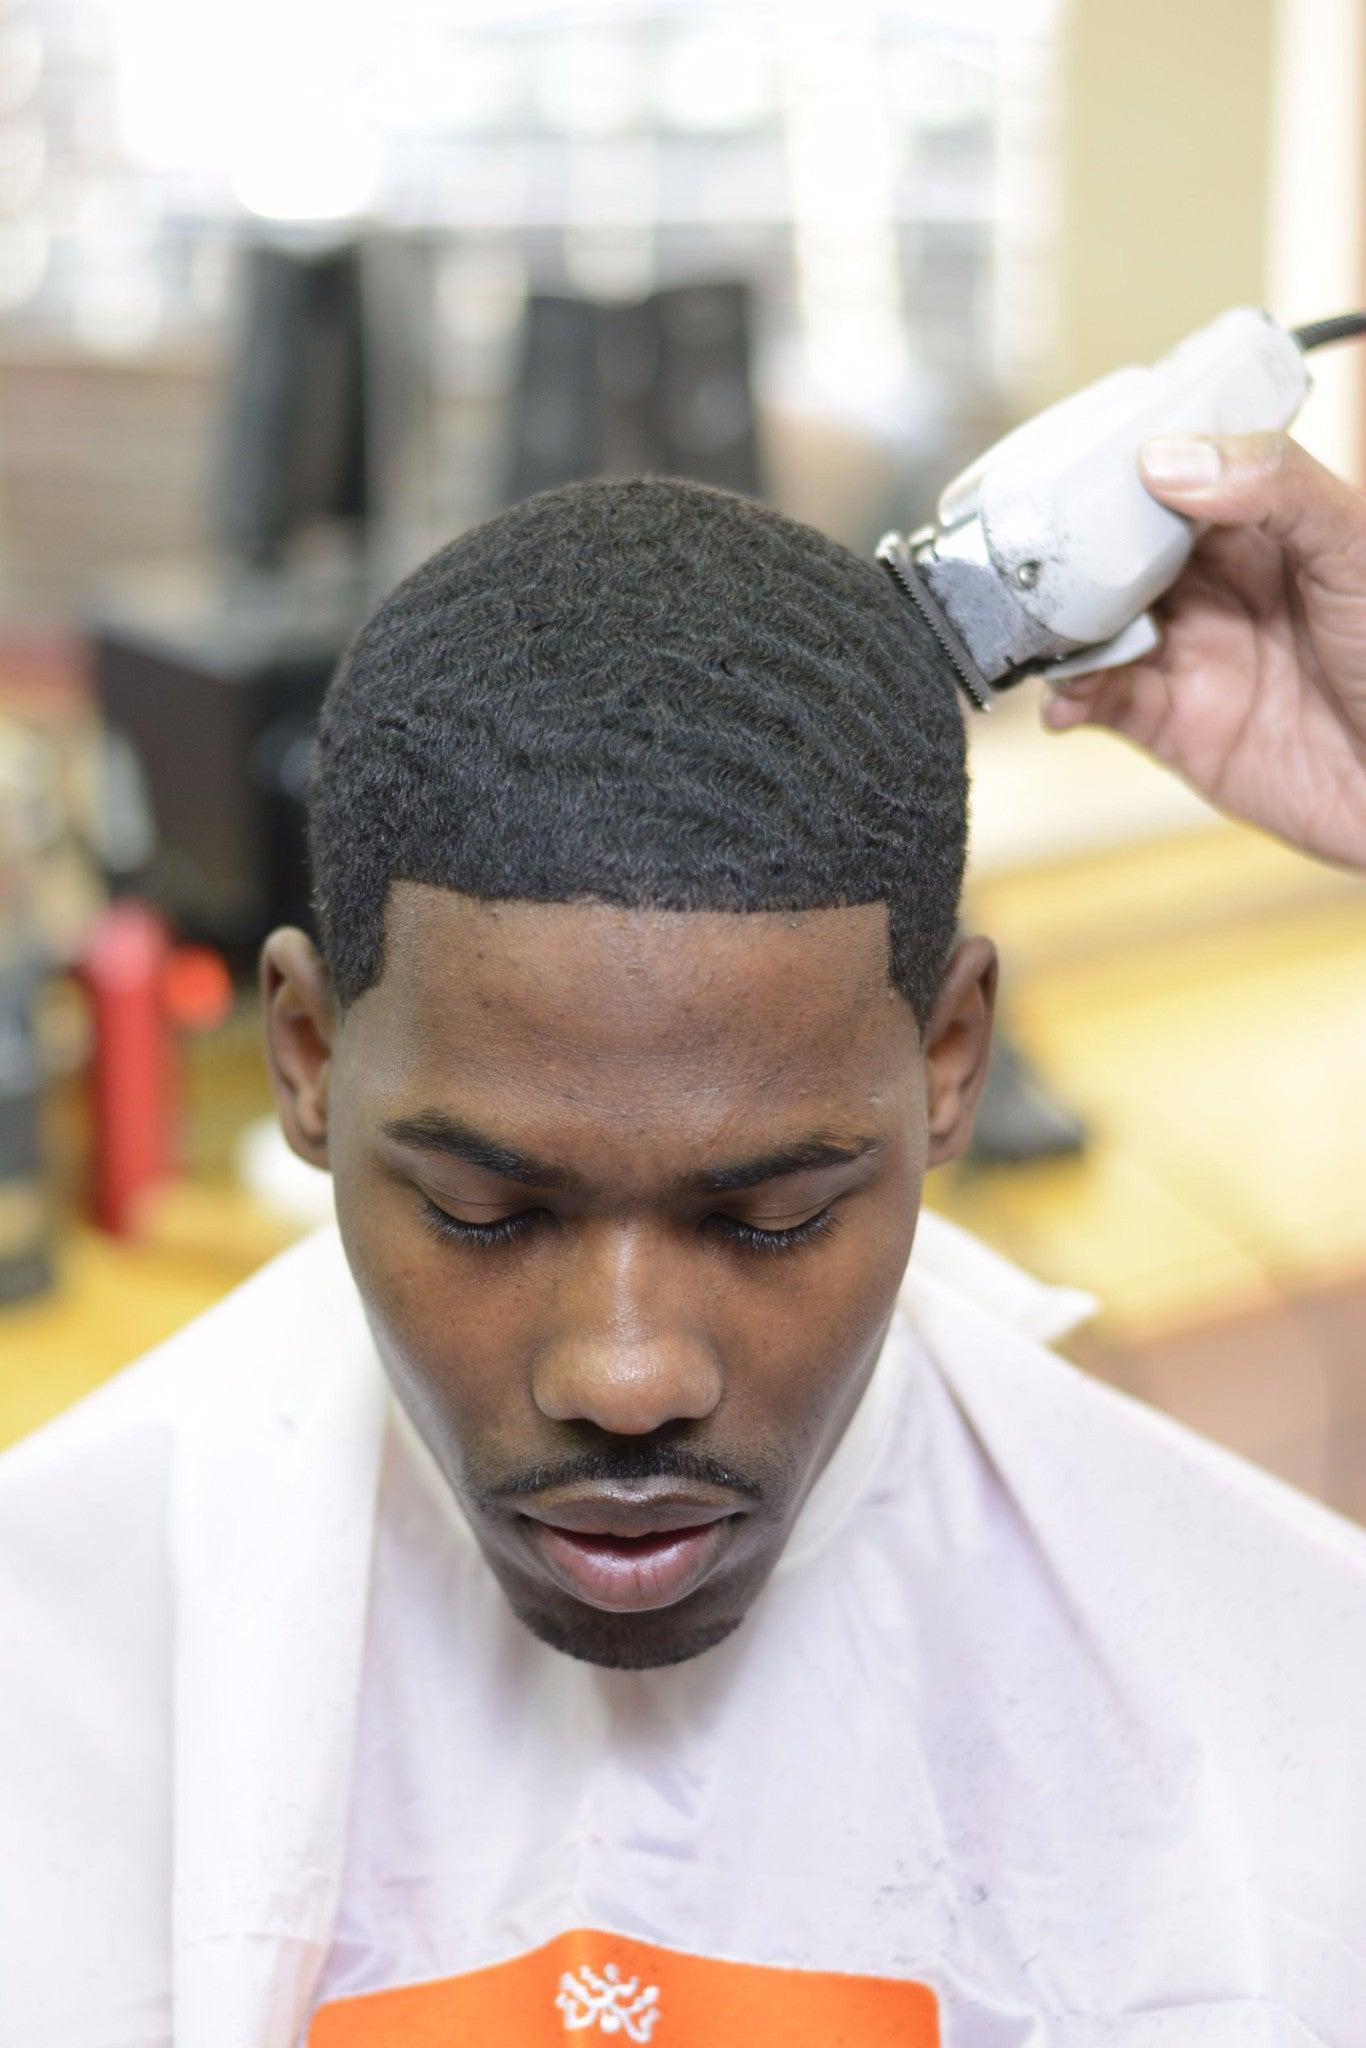 How To Get Waves Without A Durag - Wave Man Mike 